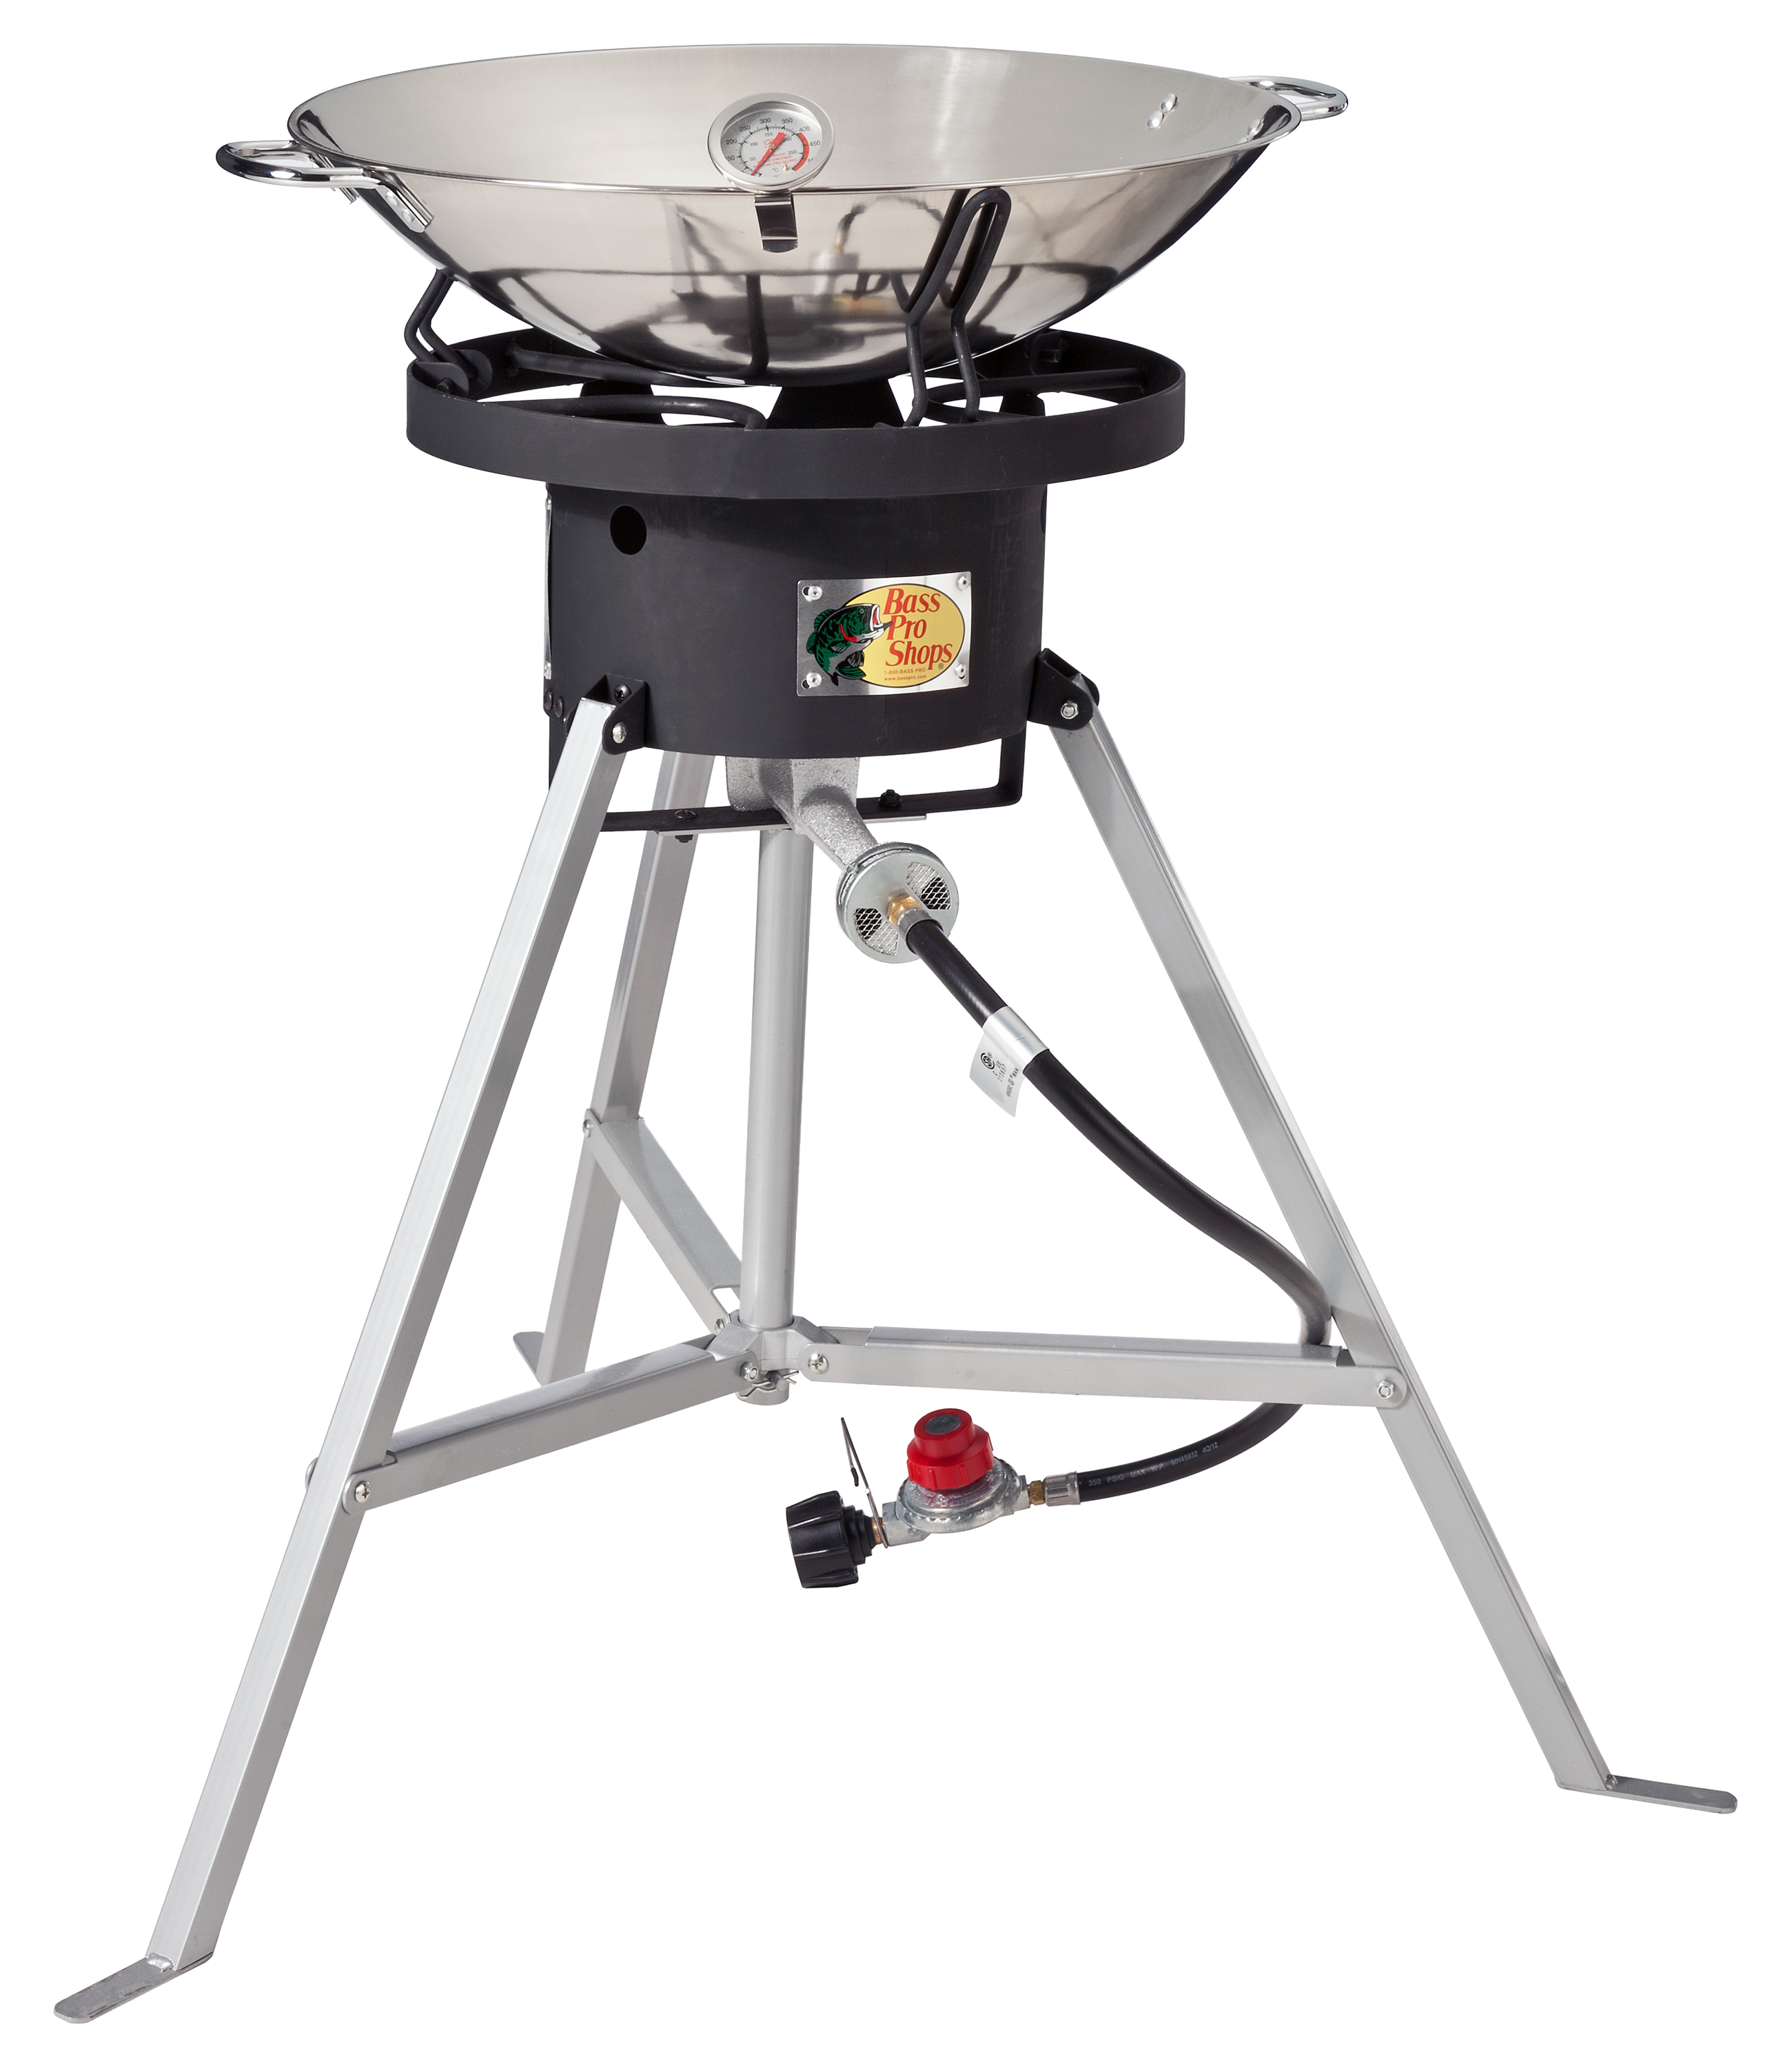 Bass Pro Shops 18'' Stainless Steel Wok and Propane Cooker Set